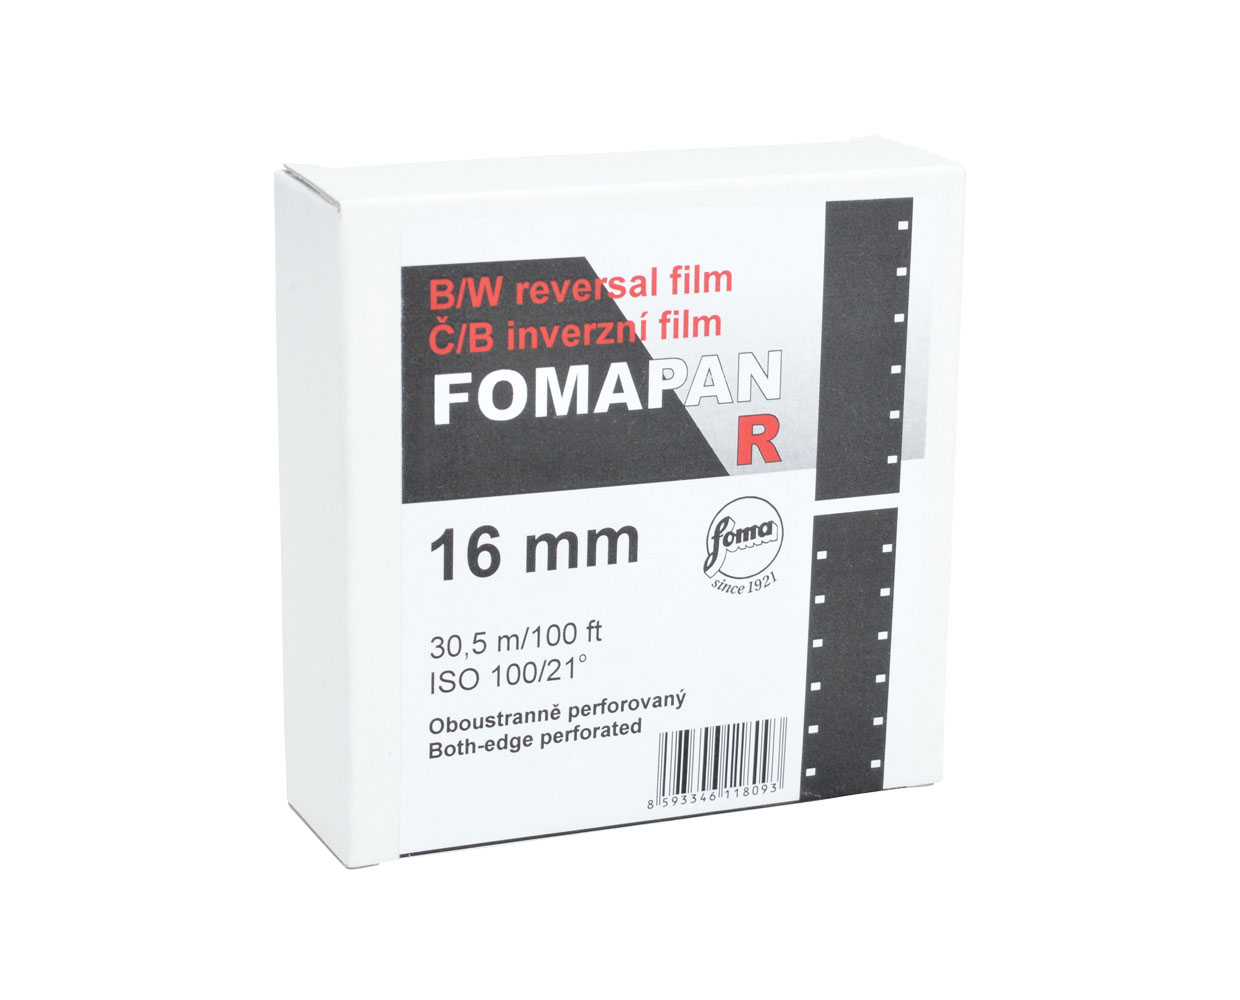 Fomapan R 100 16mm x 30.5m double perforated, Movie films, Super 8 to  35mm, Film